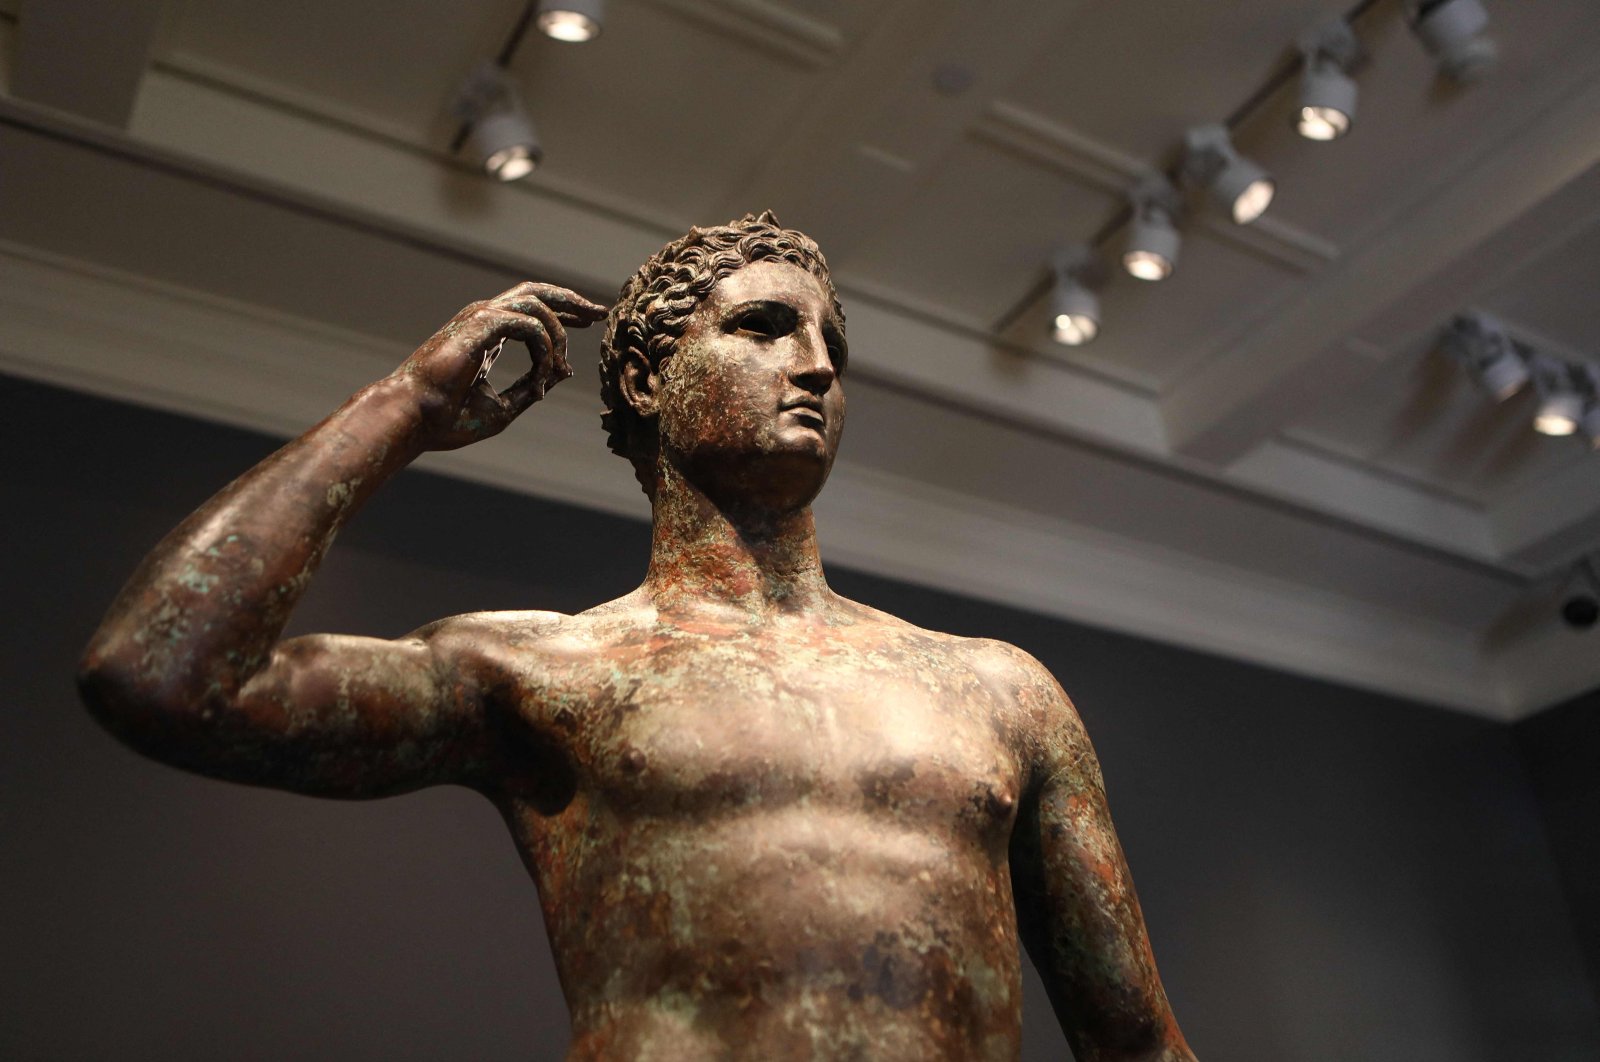 The statue known as &quot;Victorious Youth&quot; is displayed at the Getty Villa, Los Angeles, California, U.S., Dec. 13, 2018. (AFP Photo)